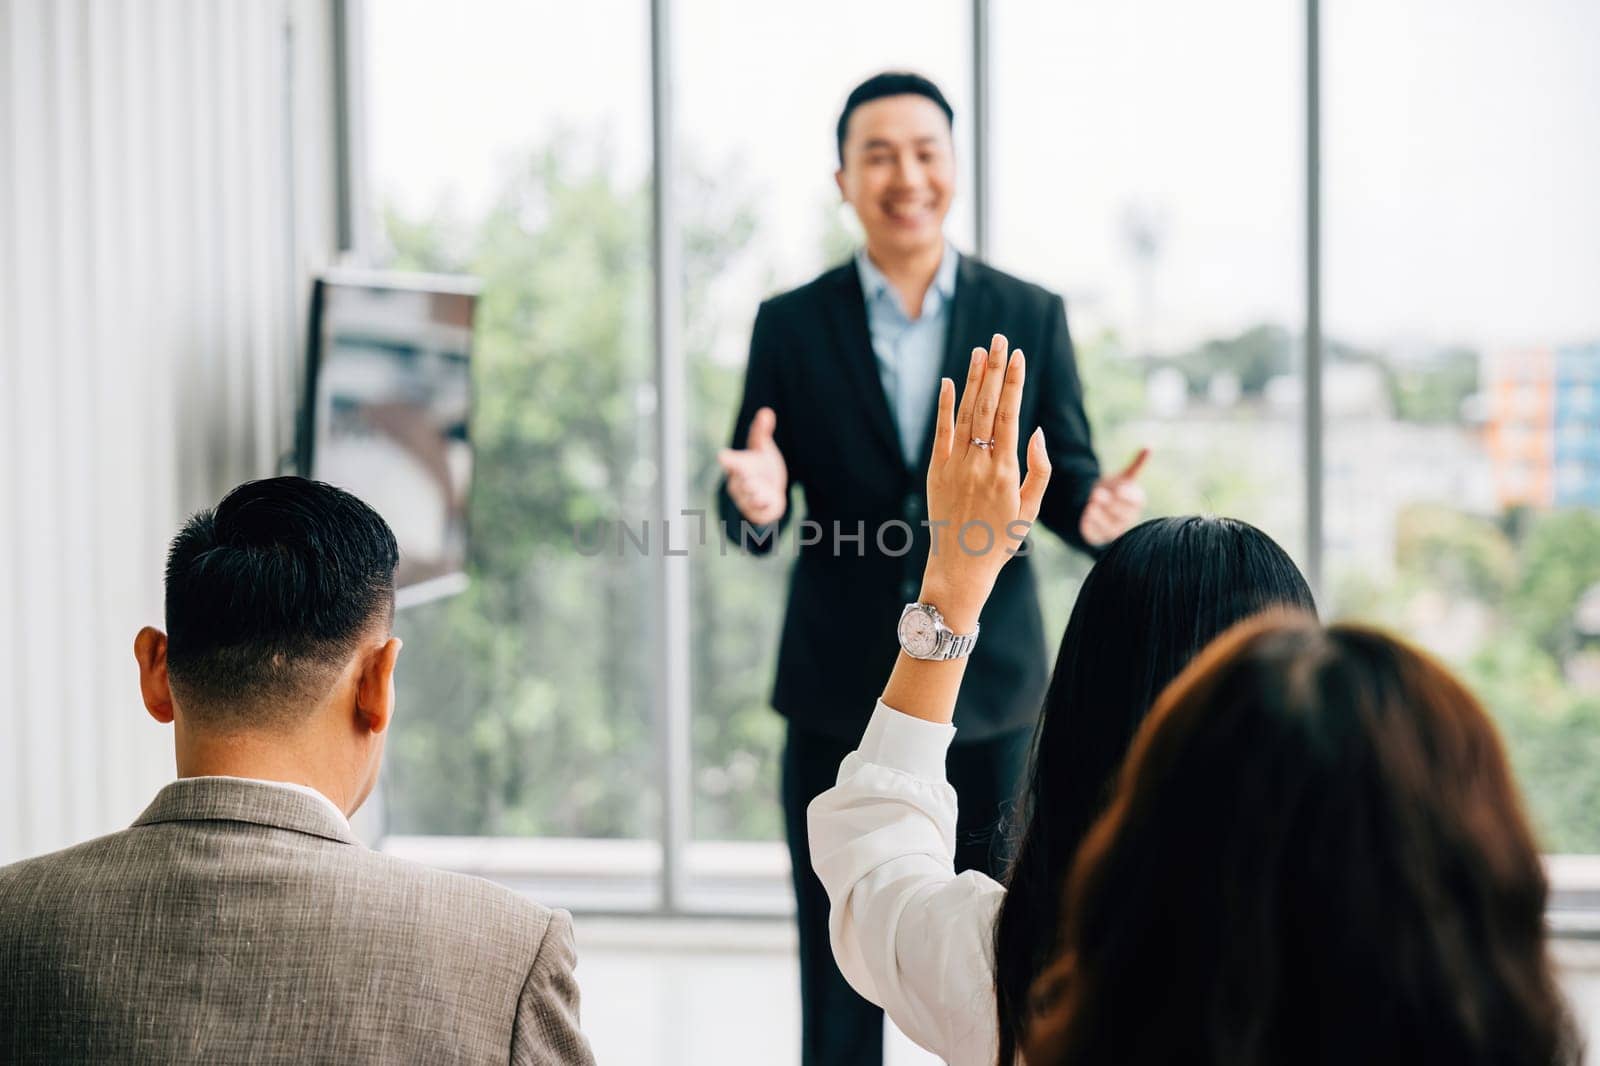 Businesspeople in seminar meeting room raise their hands to engage the speaker, reflecting active audience participation and a strong sense of teamwork. It all about the question and answer concept.